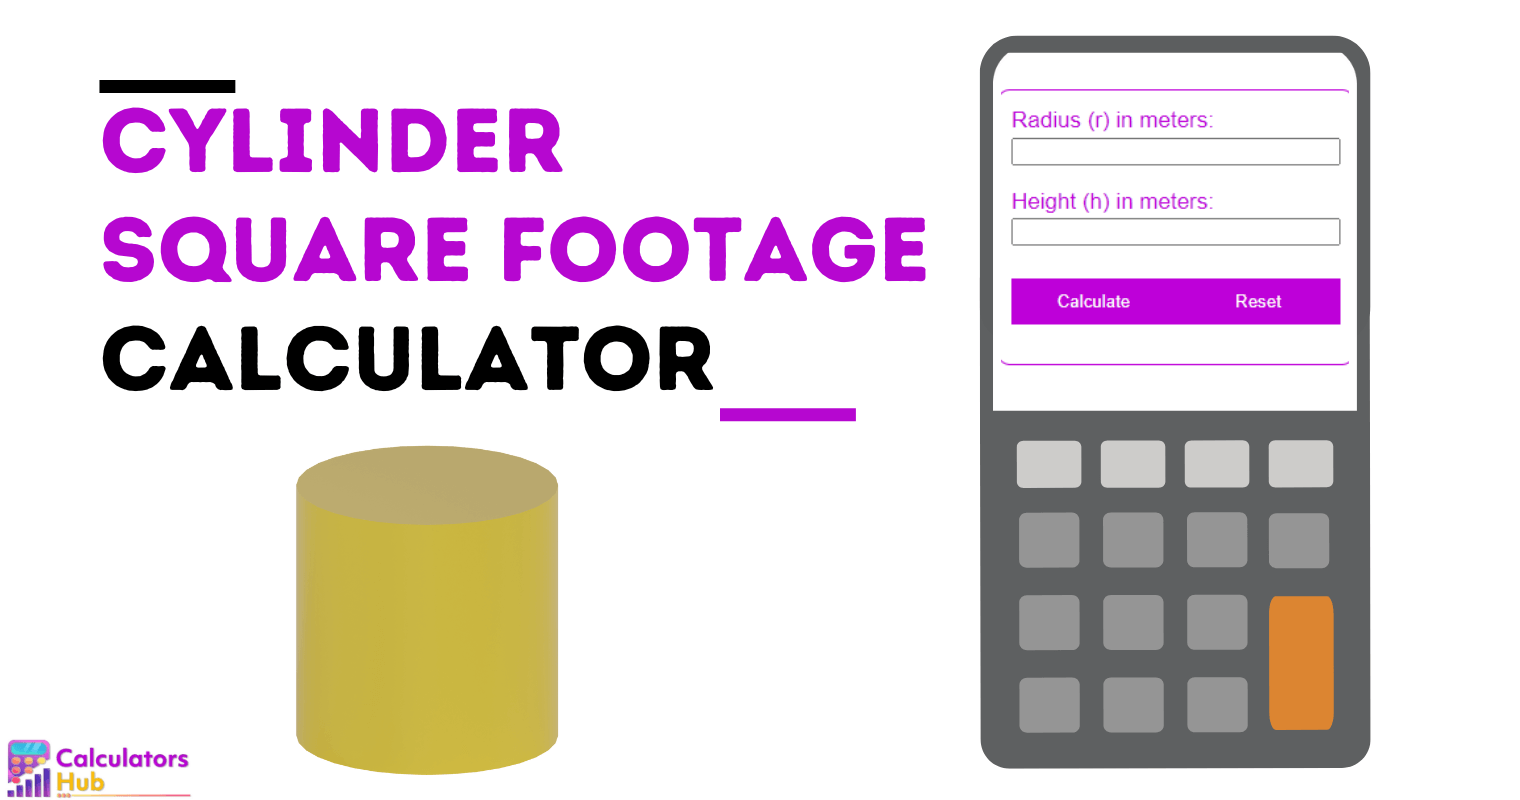 Cylinder Square Footage Calculator